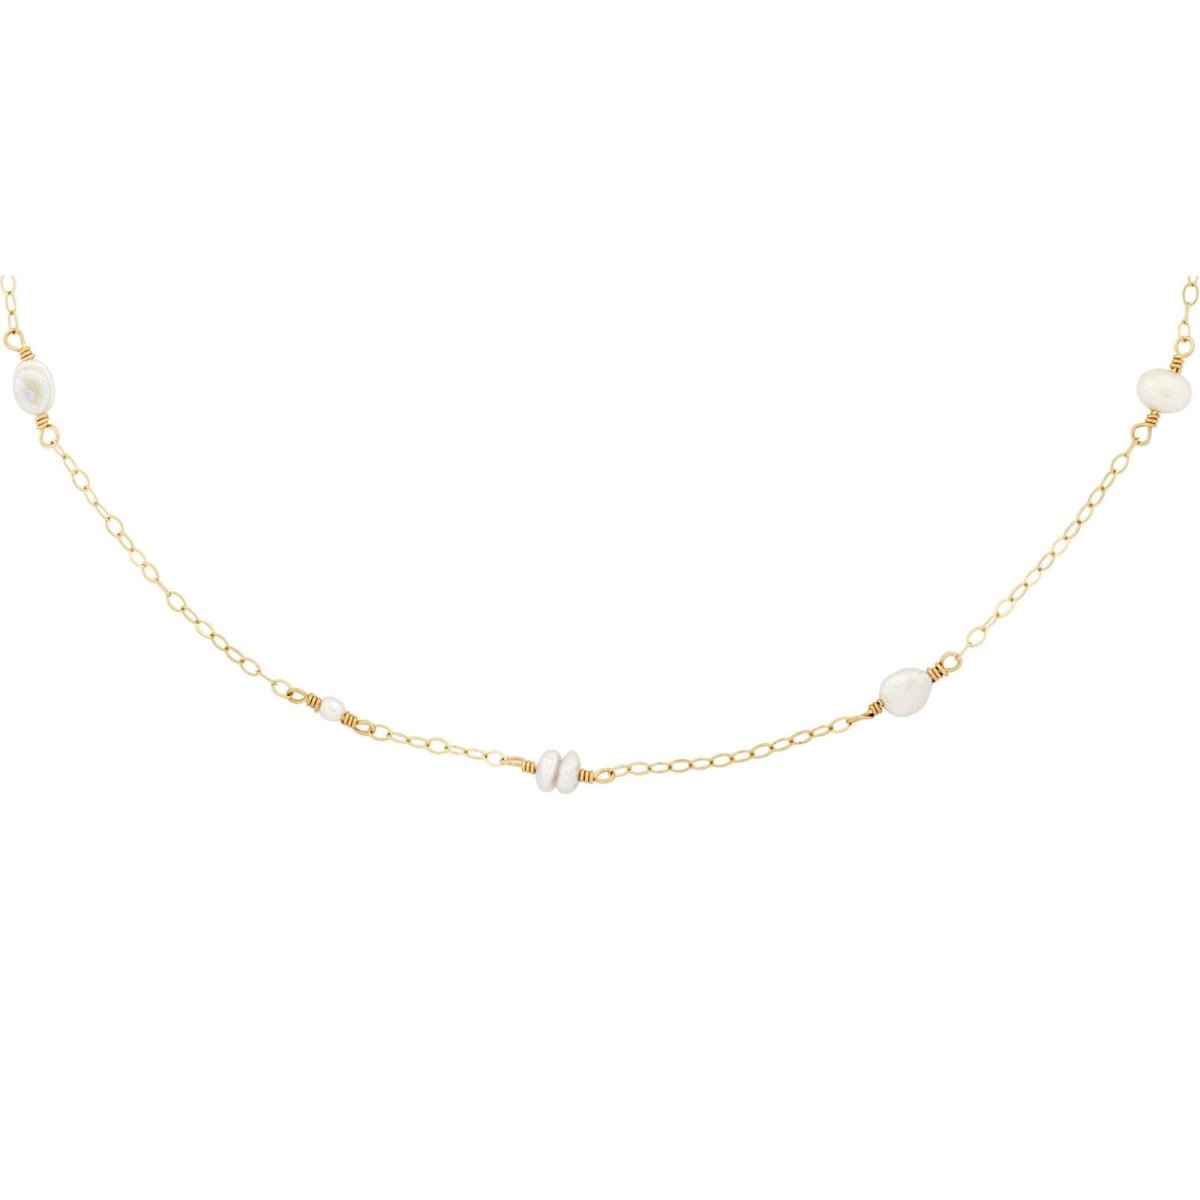 11-12 Golden South Sea Pearl Floating Necklace, 18ct Yellow Gold – Fine  Basics